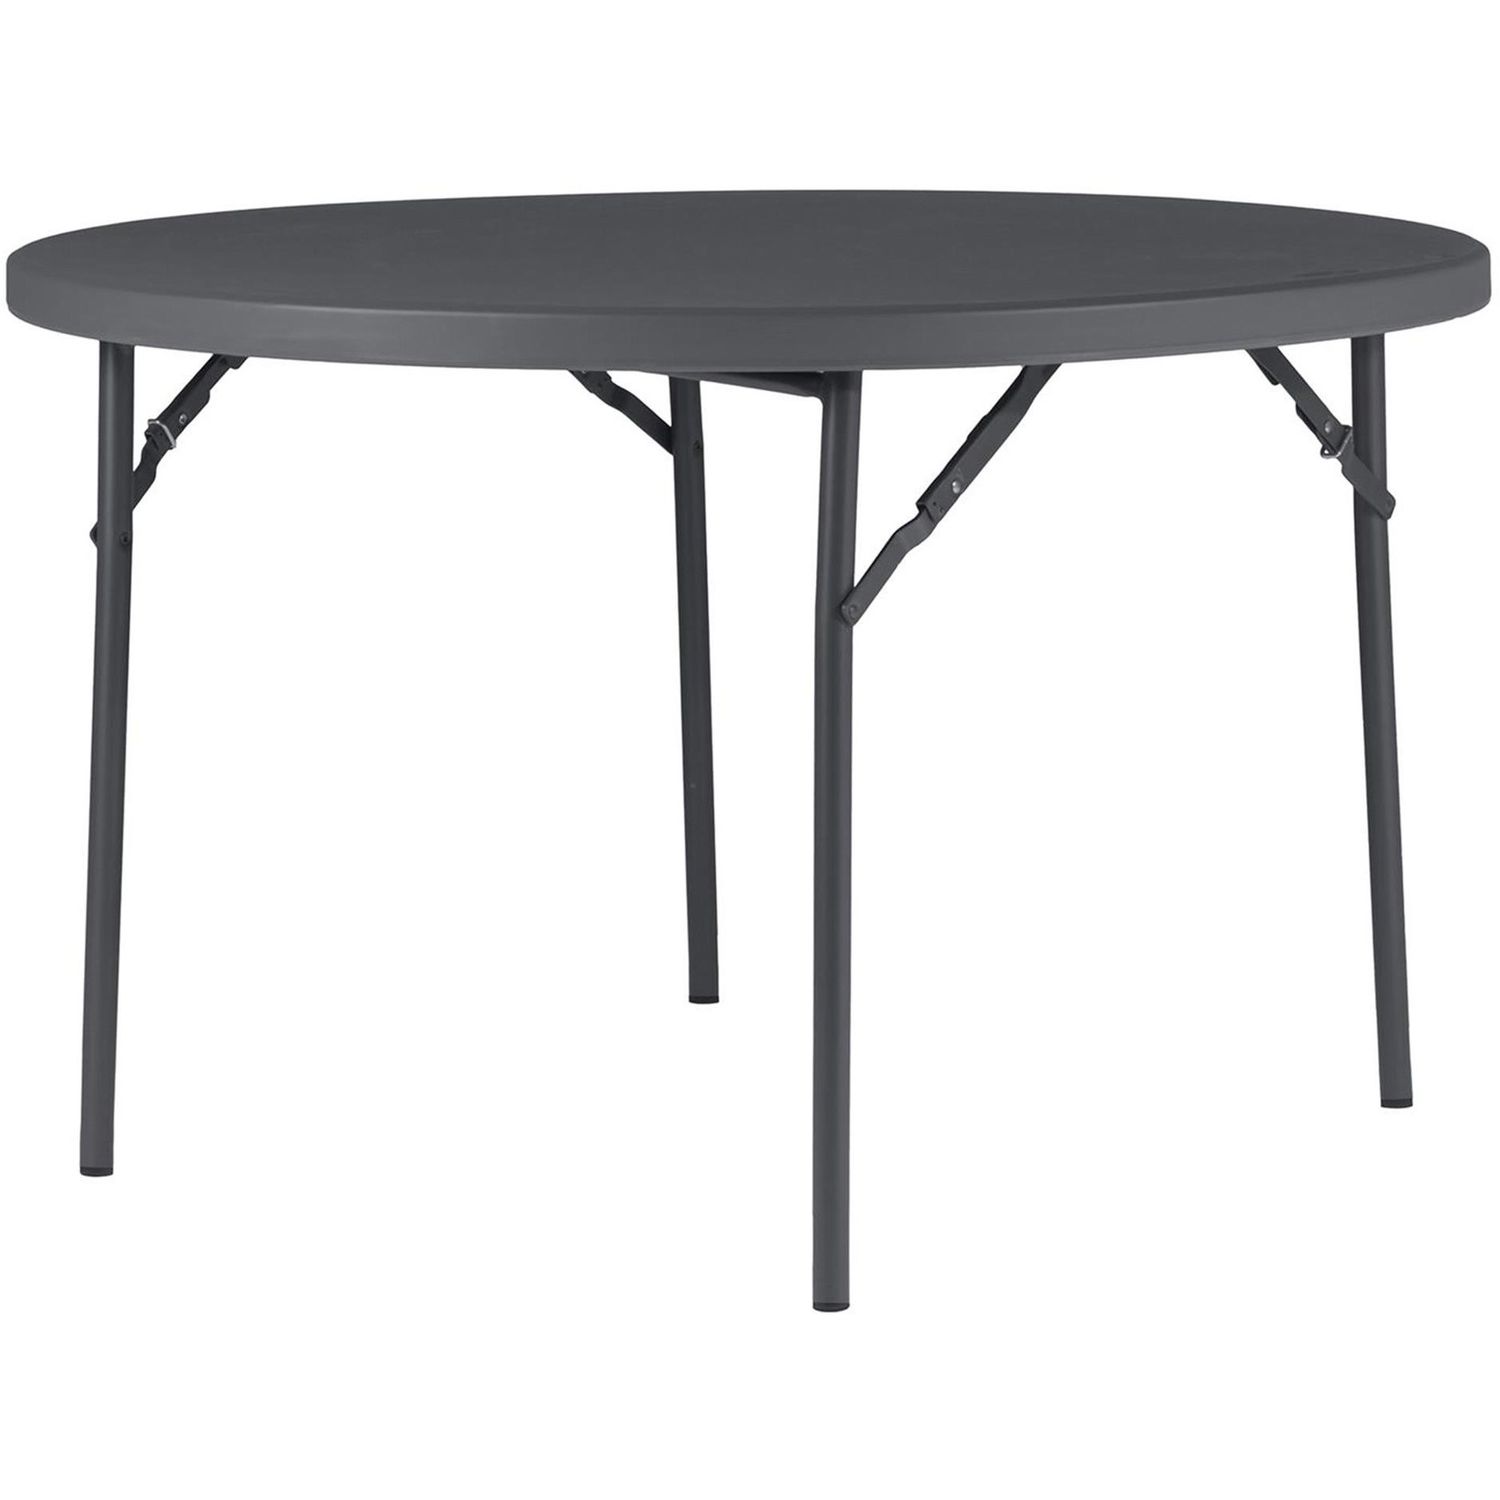 Zown Commercial Round Blow Mold Fold Table Round Top, 4 Legs x 48" Table Top Diameter, 29.30" Height, Gray, High-density Polyethylene (HDPE), Resin